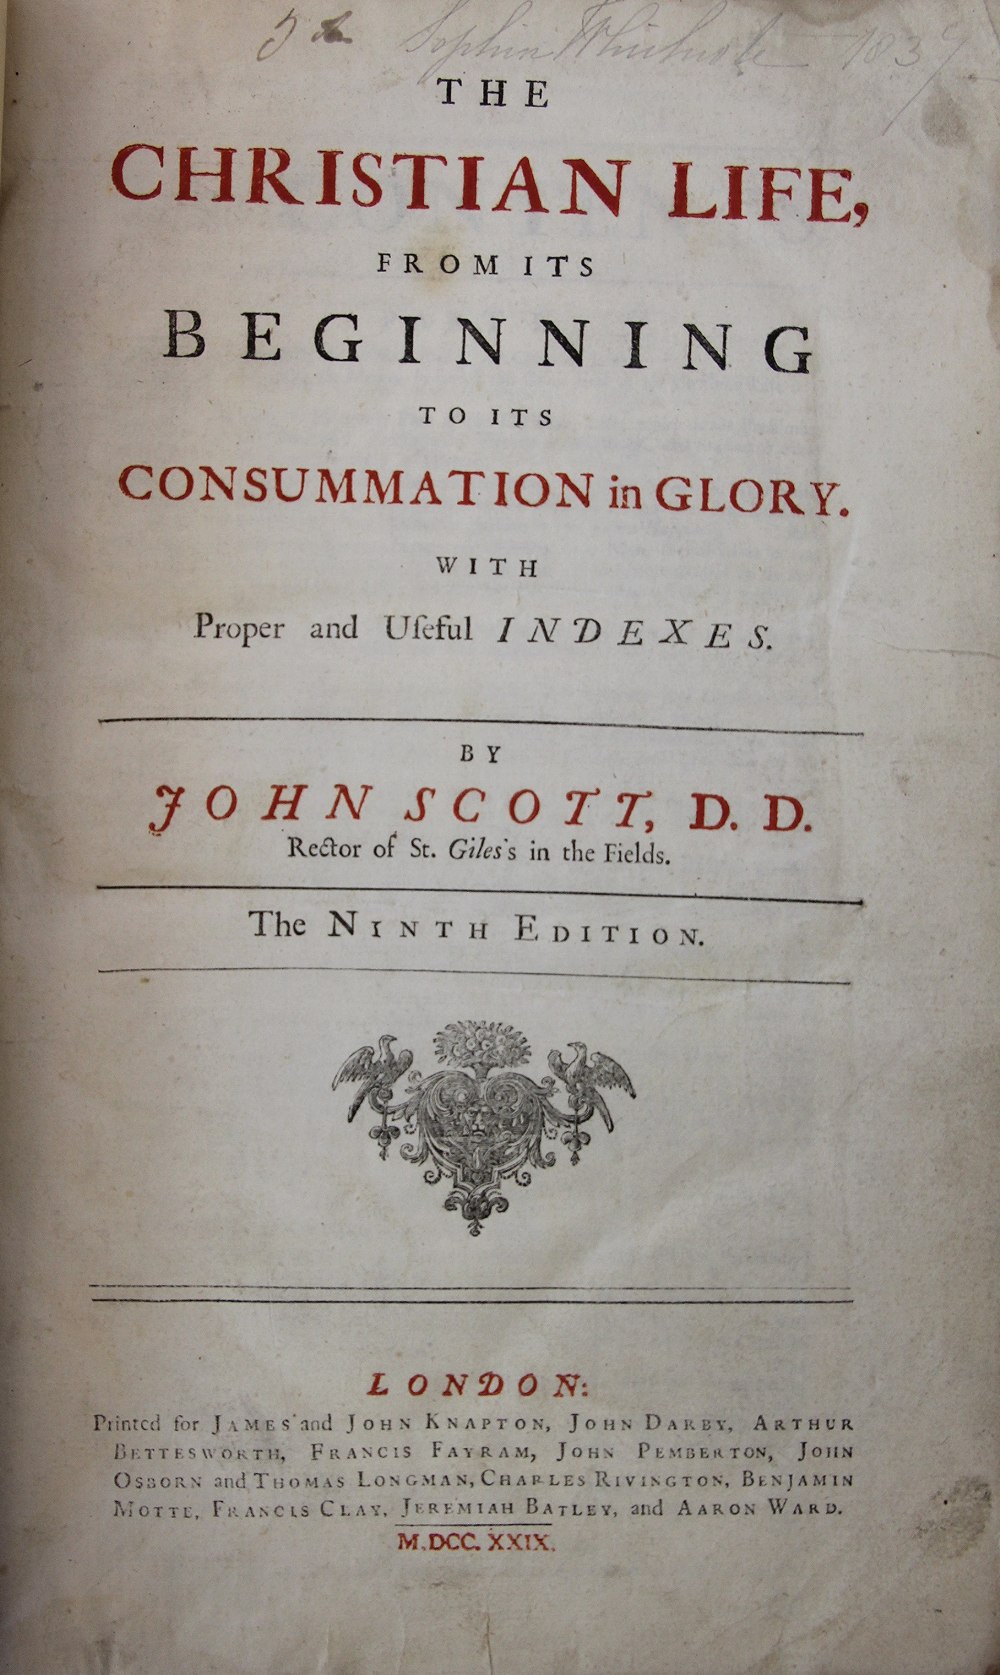 SCOTT (J), THE CHRISTIAN LIFE, FROM ITS BEGINING TO ITS CONSUMMATION AND GLORY, 9th edition, - Image 9 of 9